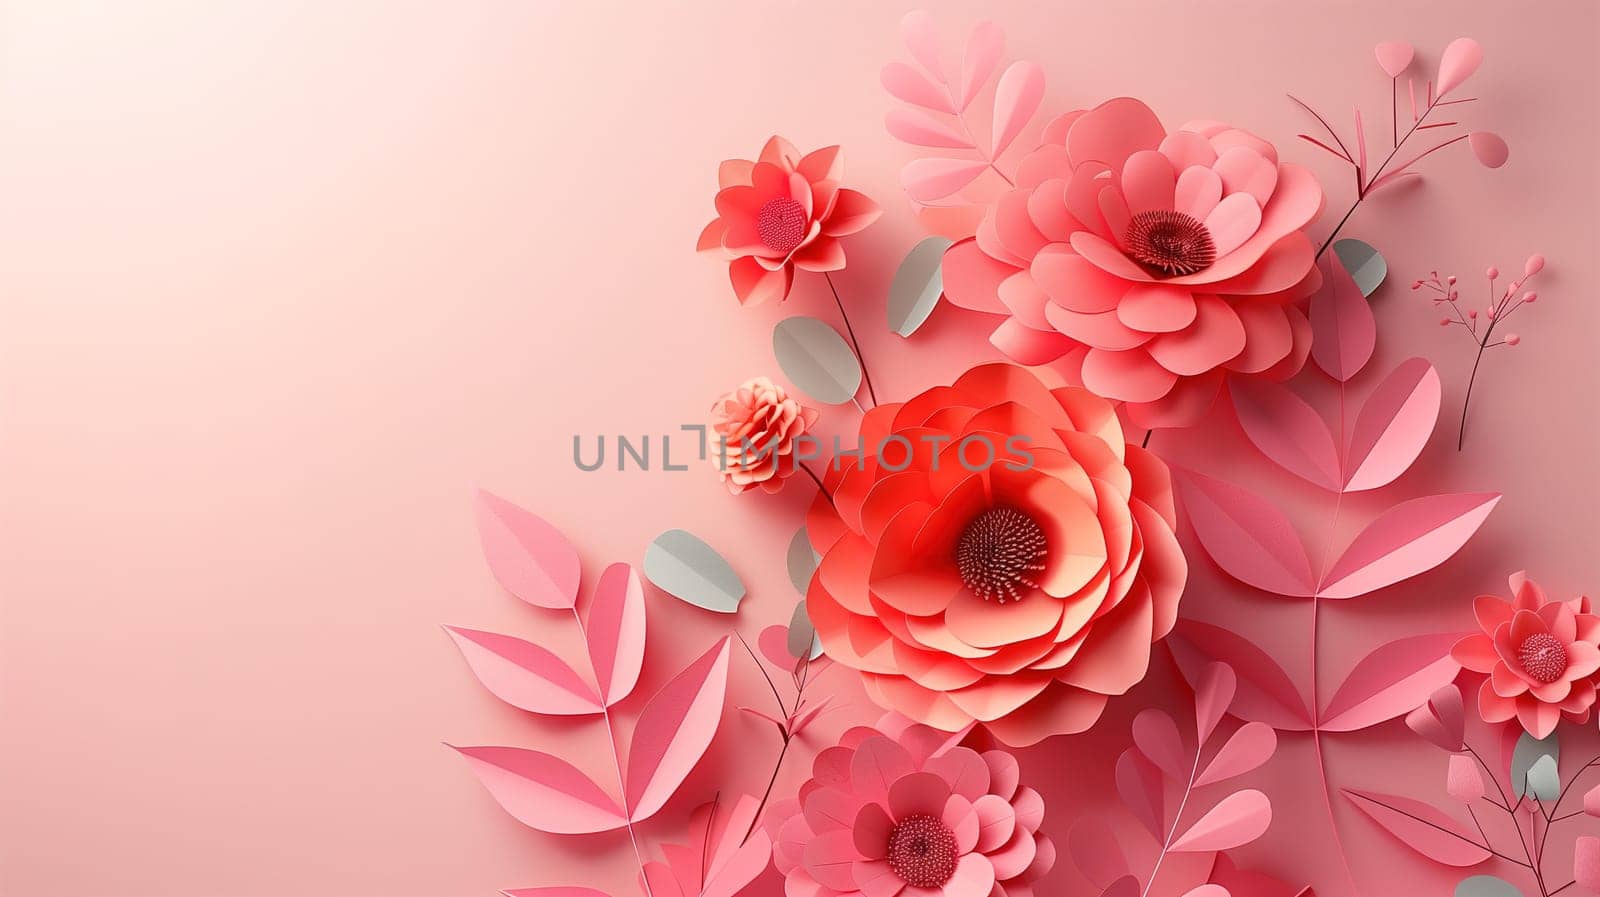 Paper Flowers on a Pink Background by TRMK